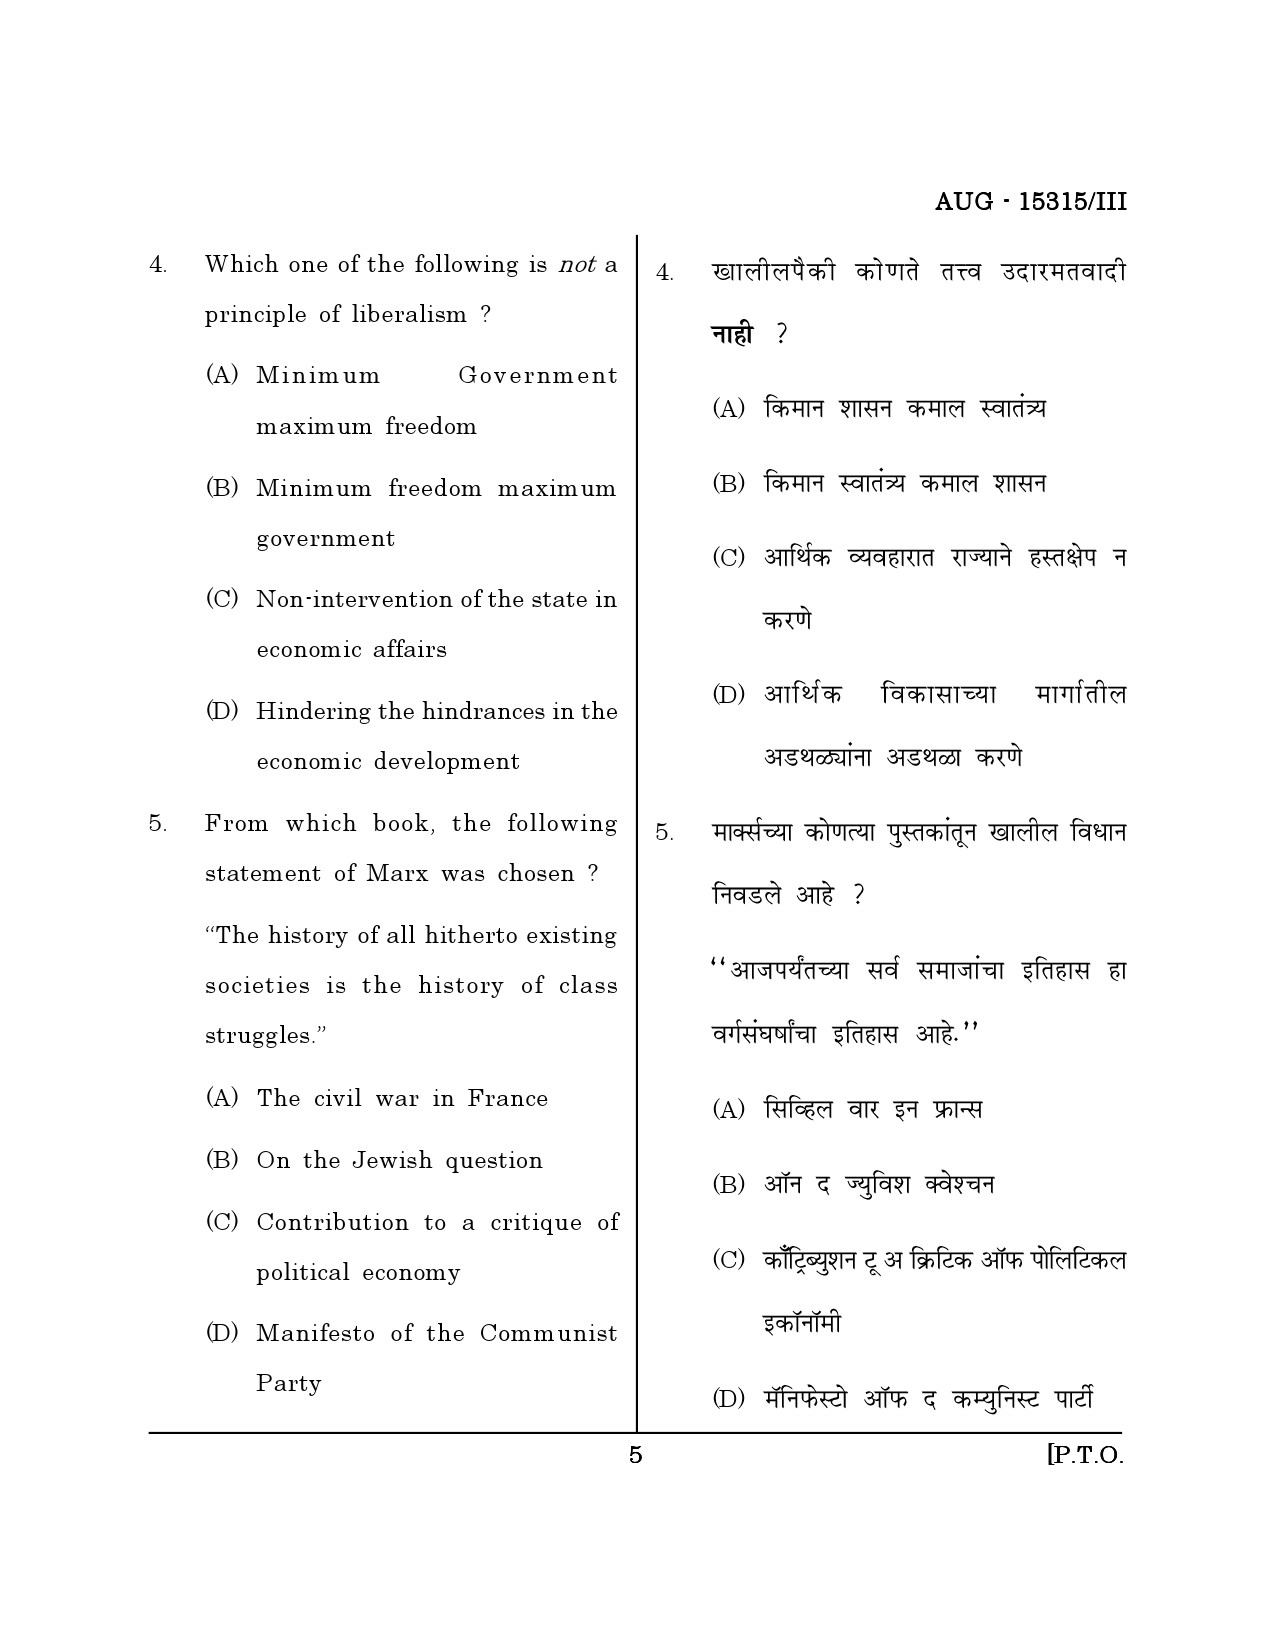 Maharashtra SET Political Science Question Paper III August 2015 4